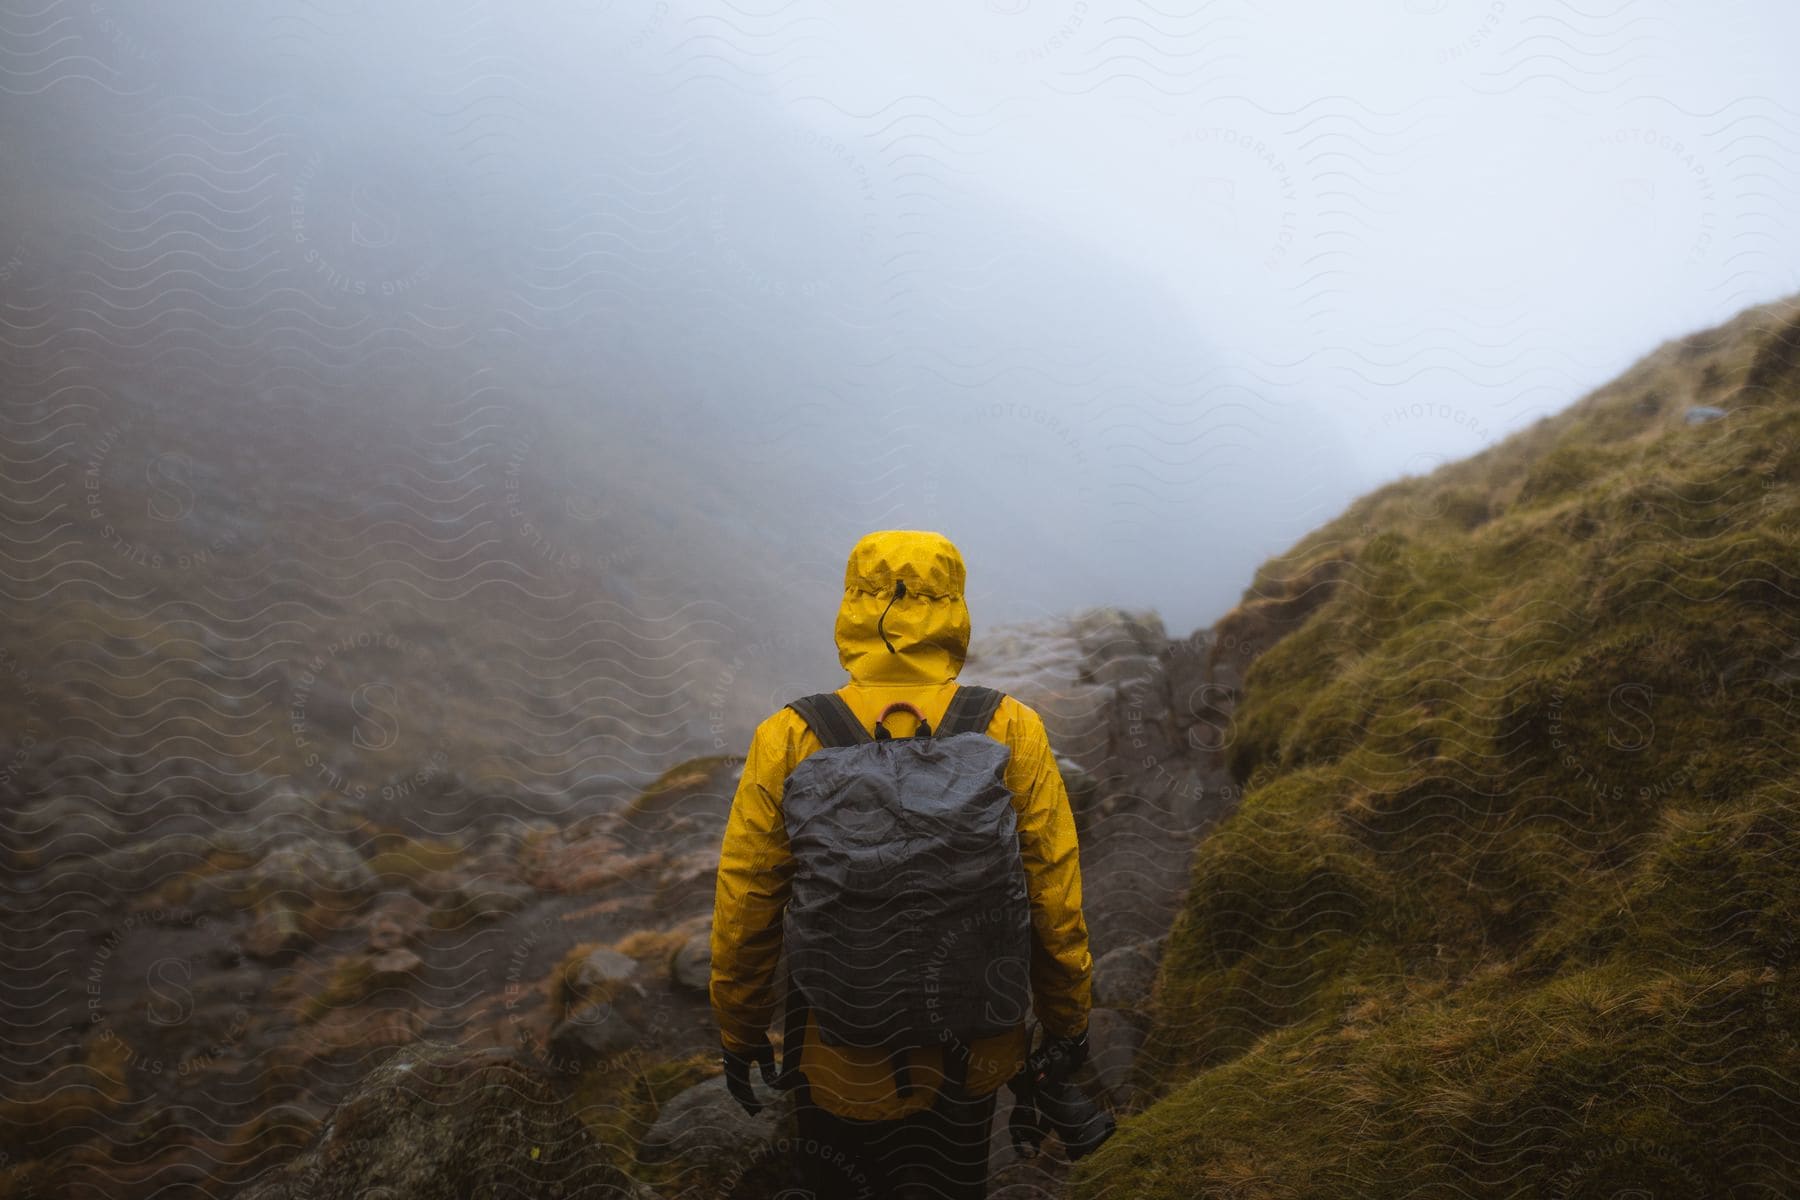 A person walking alone on rocky terrain with grasses carrying a bag and wearing a yellow jacket